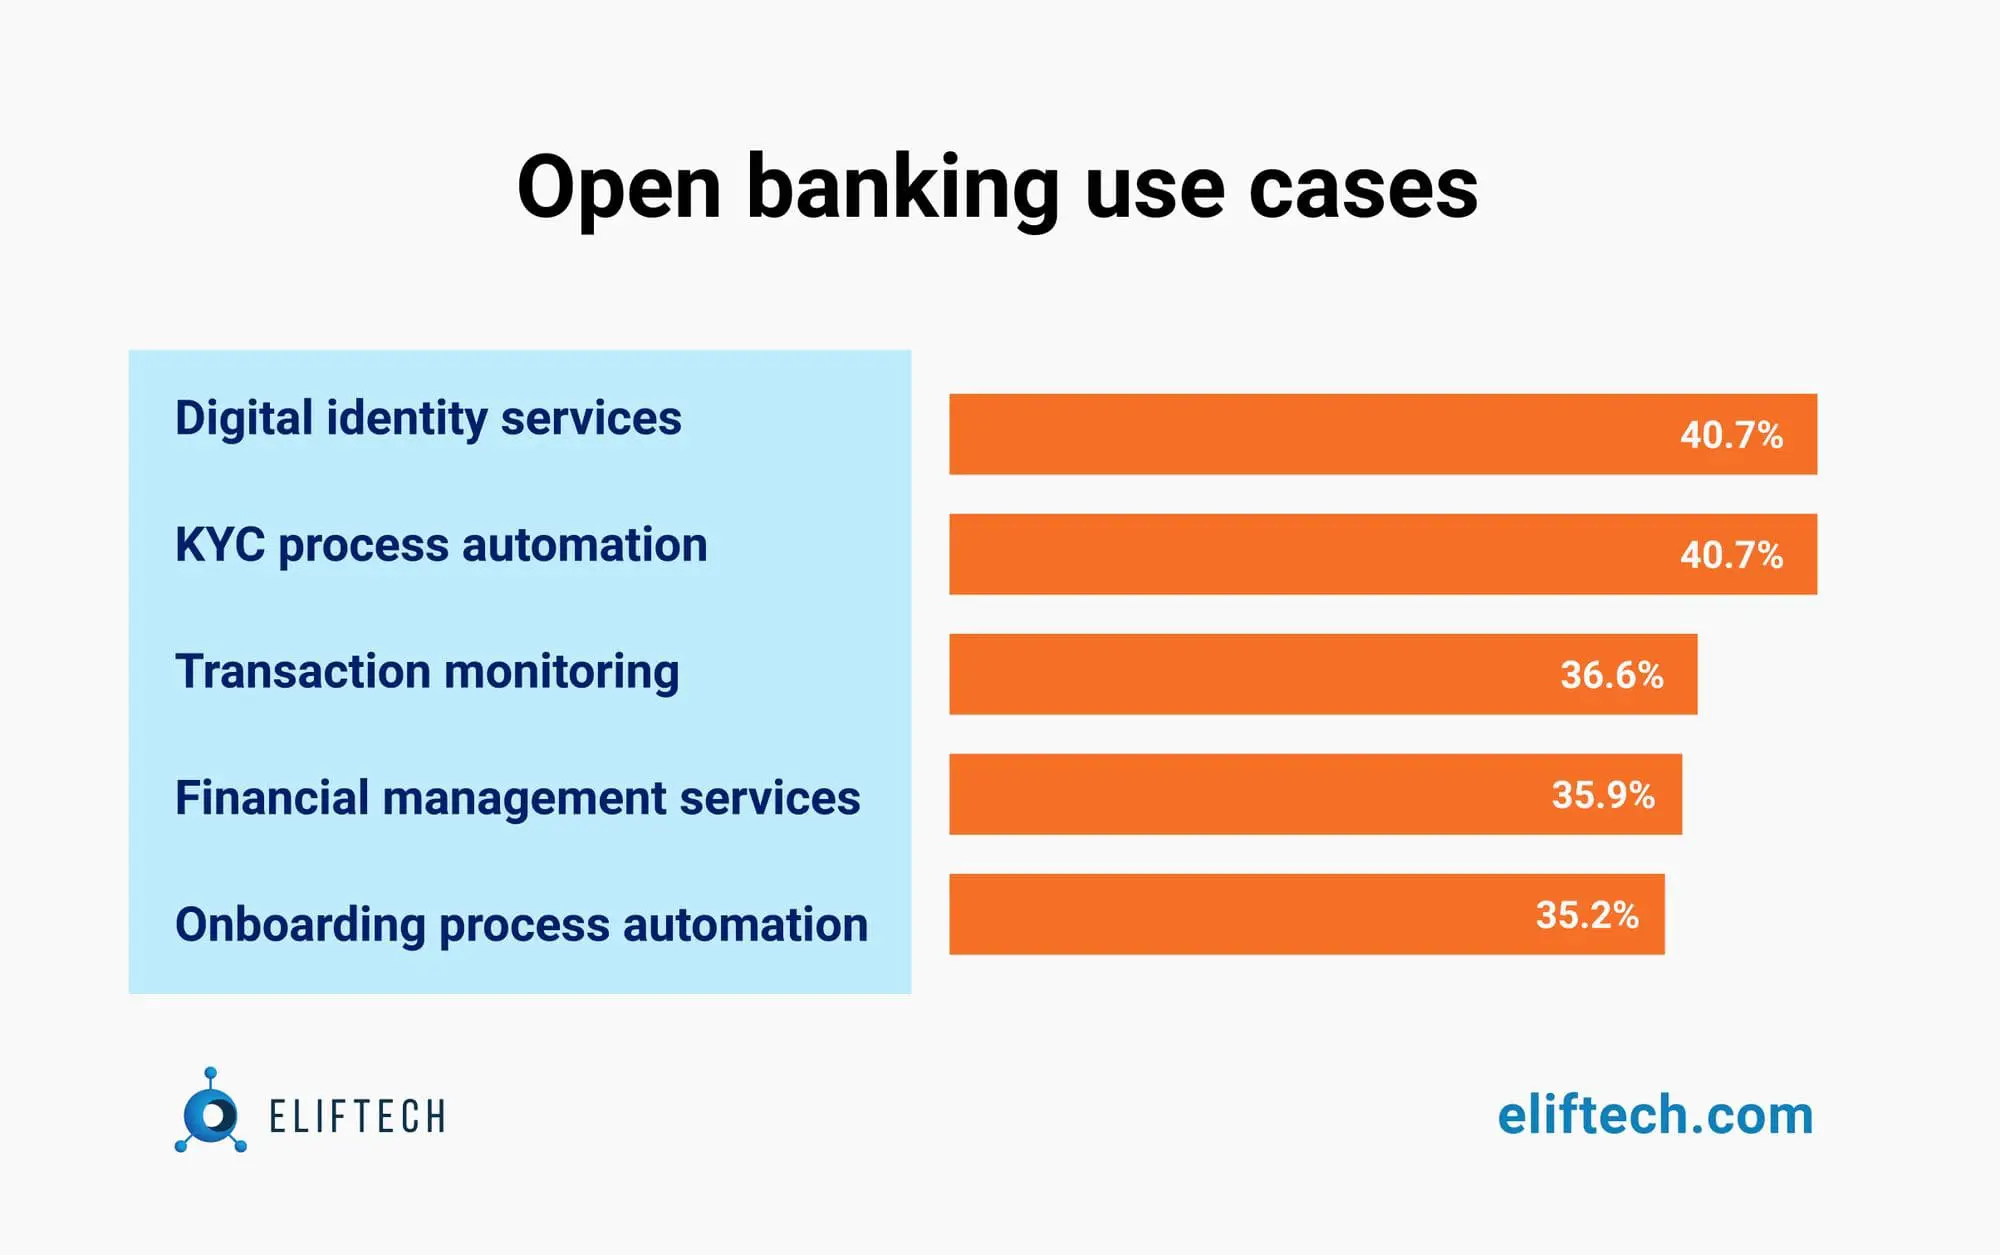 Open banking cases